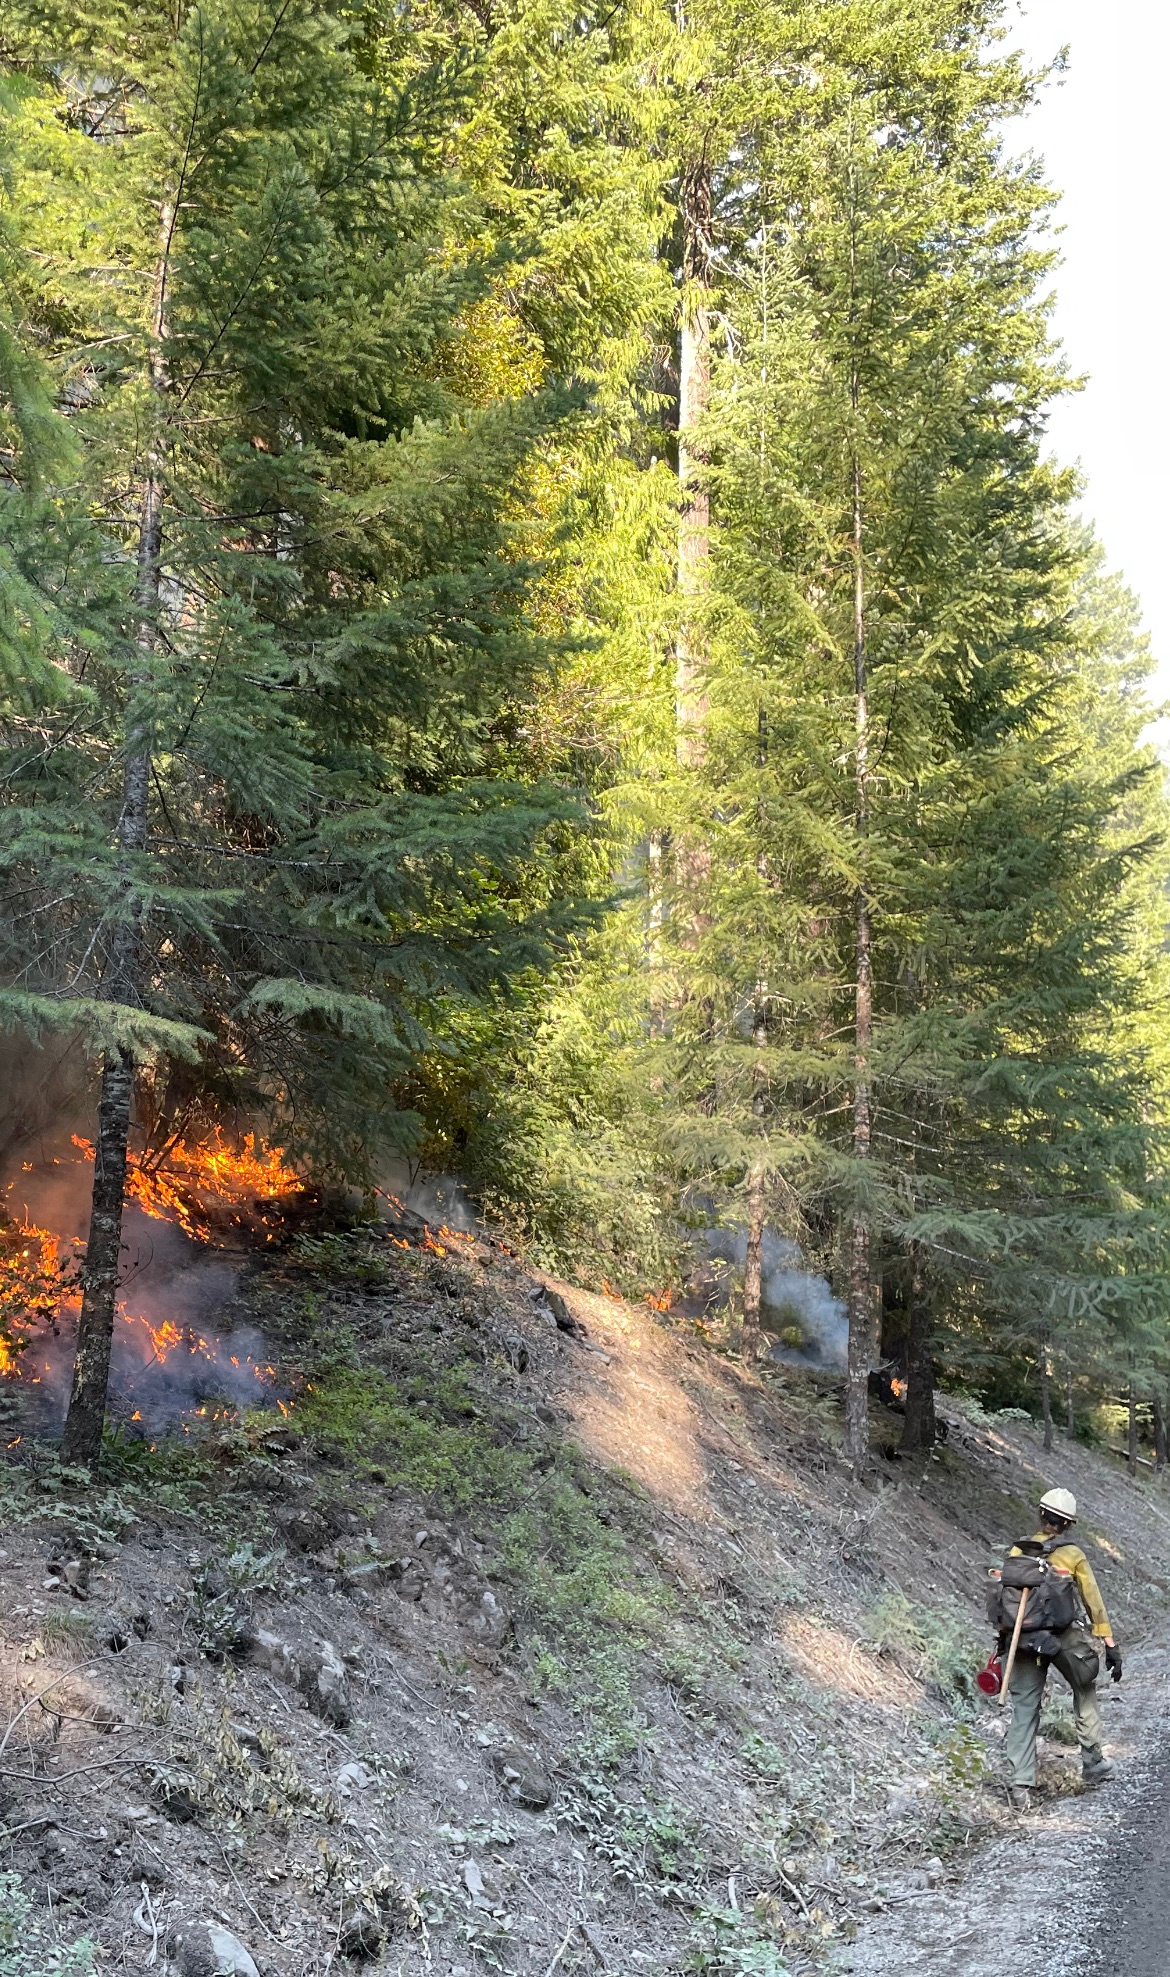 A firefighter in a yellow shirt and carrying a red drip torch walks along a dirt road with  flames visible in the undergrowth.